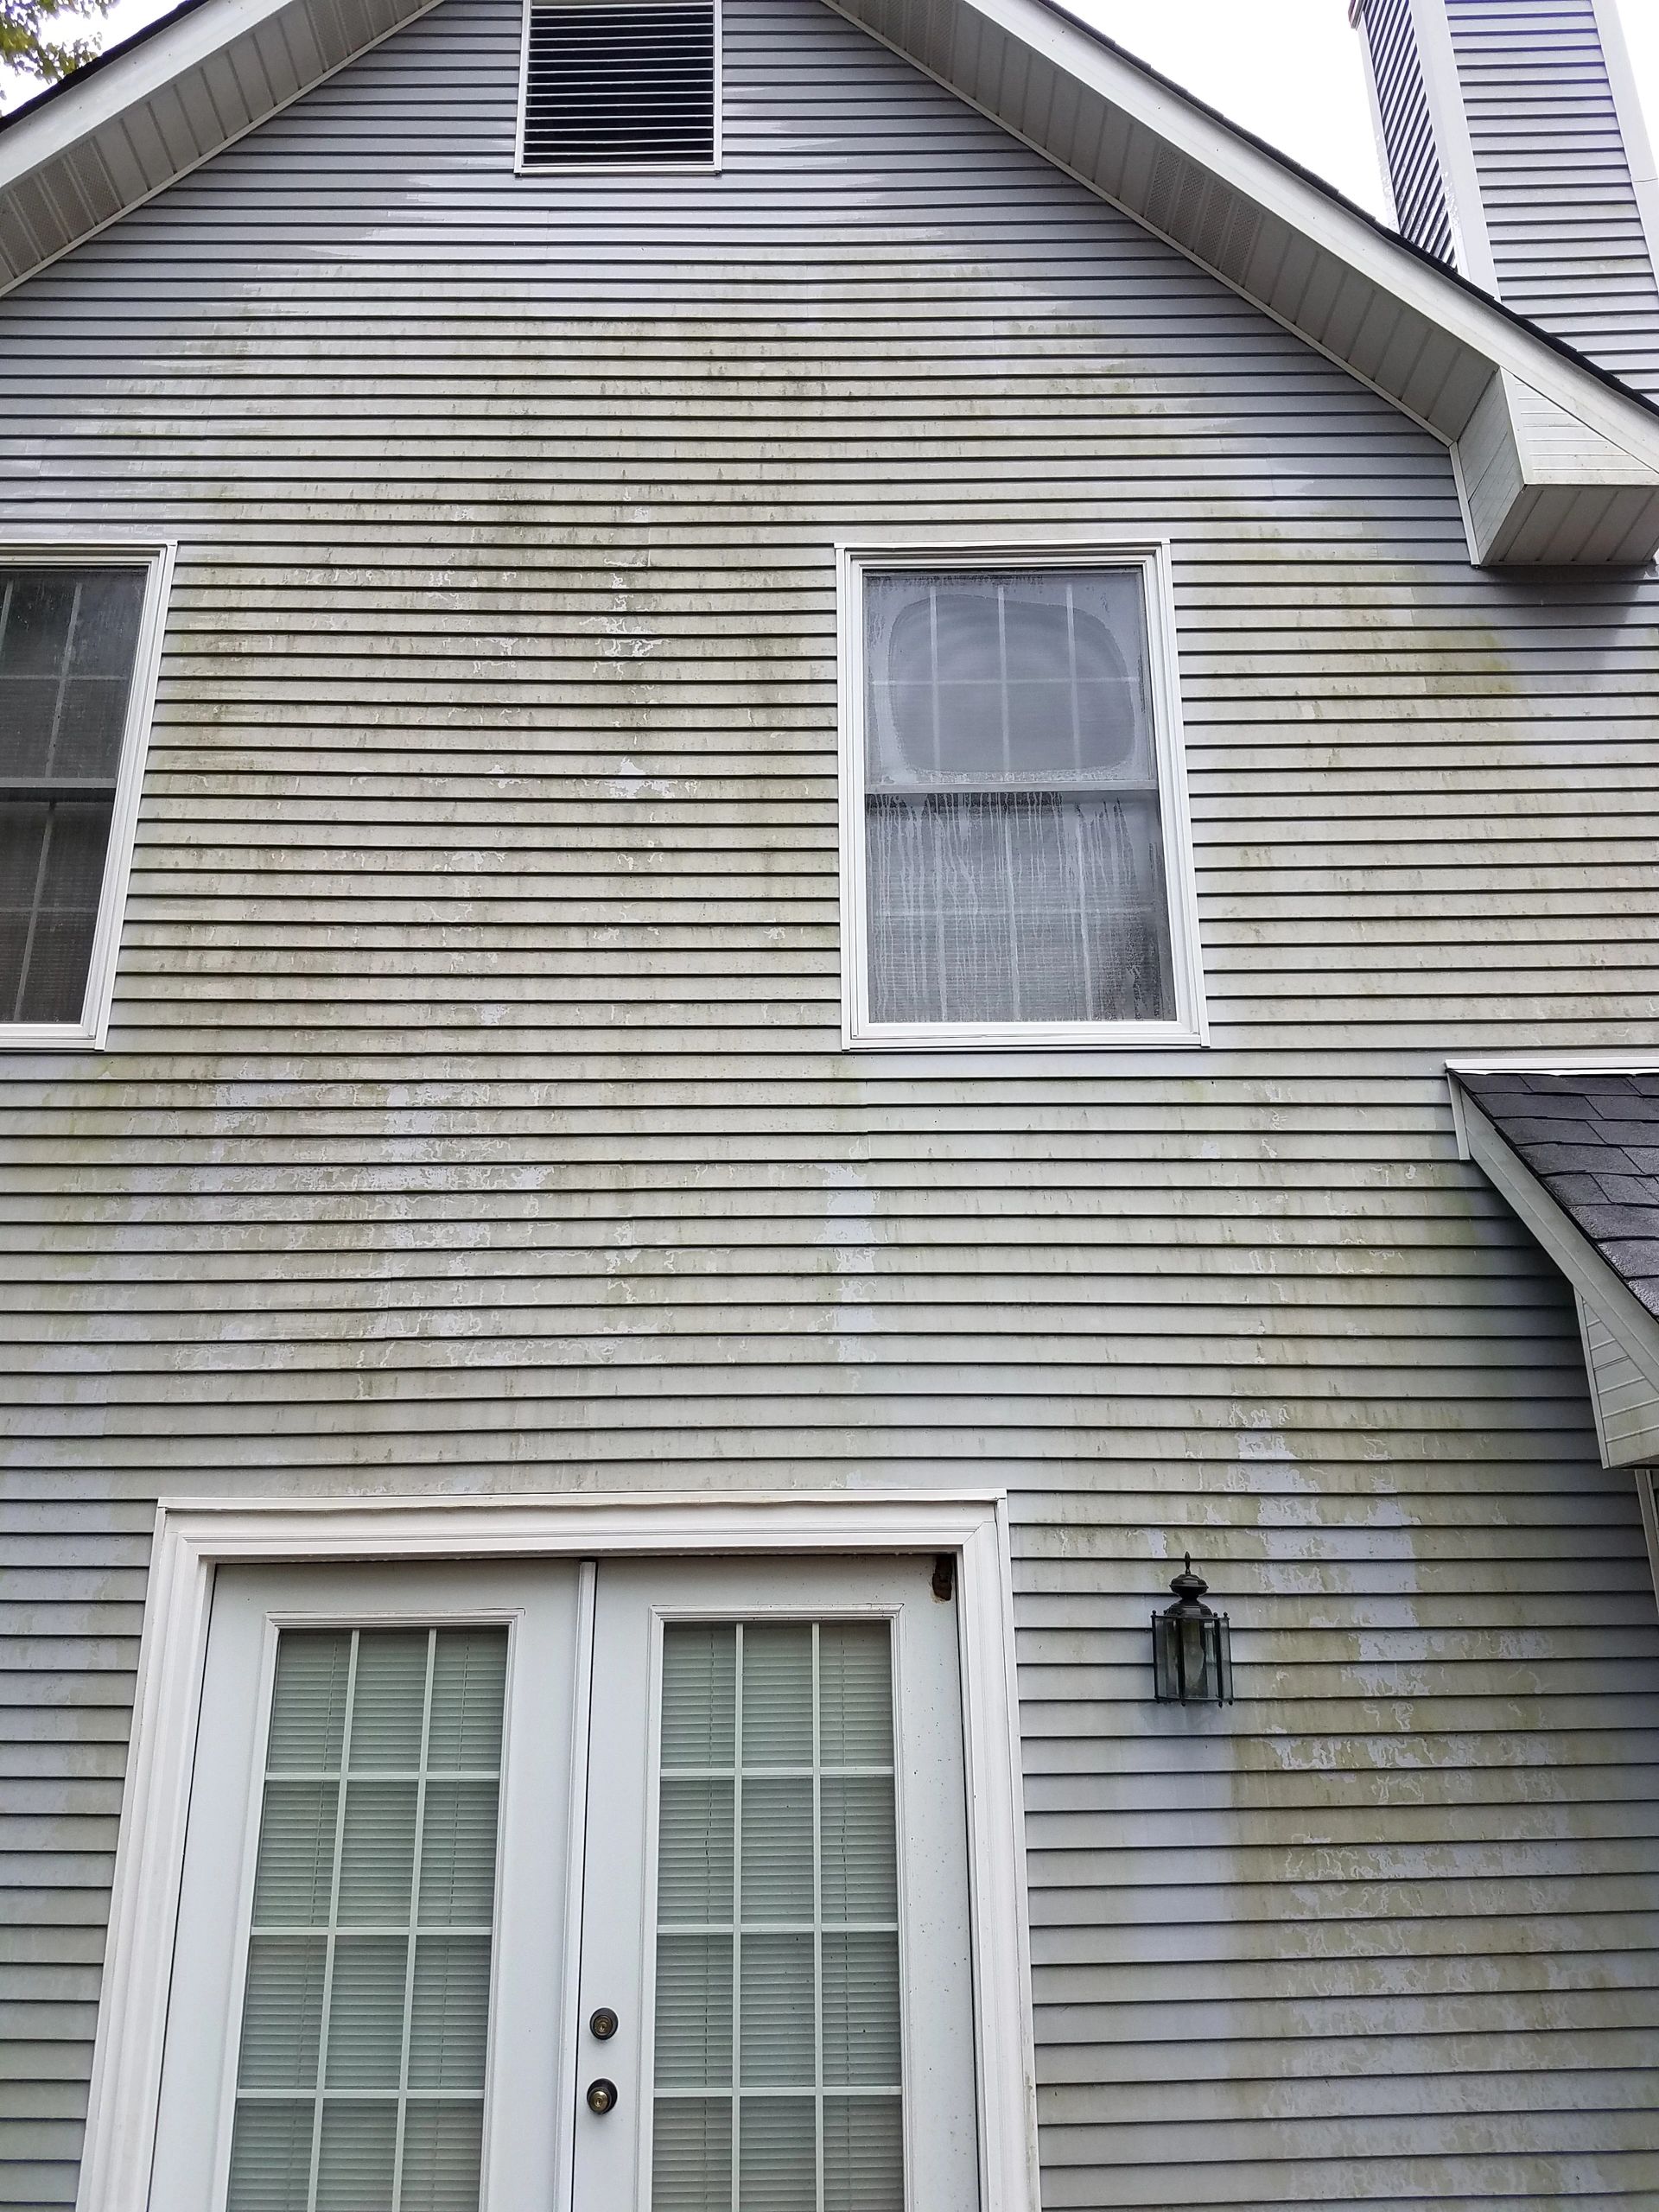 Moldy siding wash in St. Louis Mo. Power washing in St. Louis Mo. Home washing near St. Louis Mo.